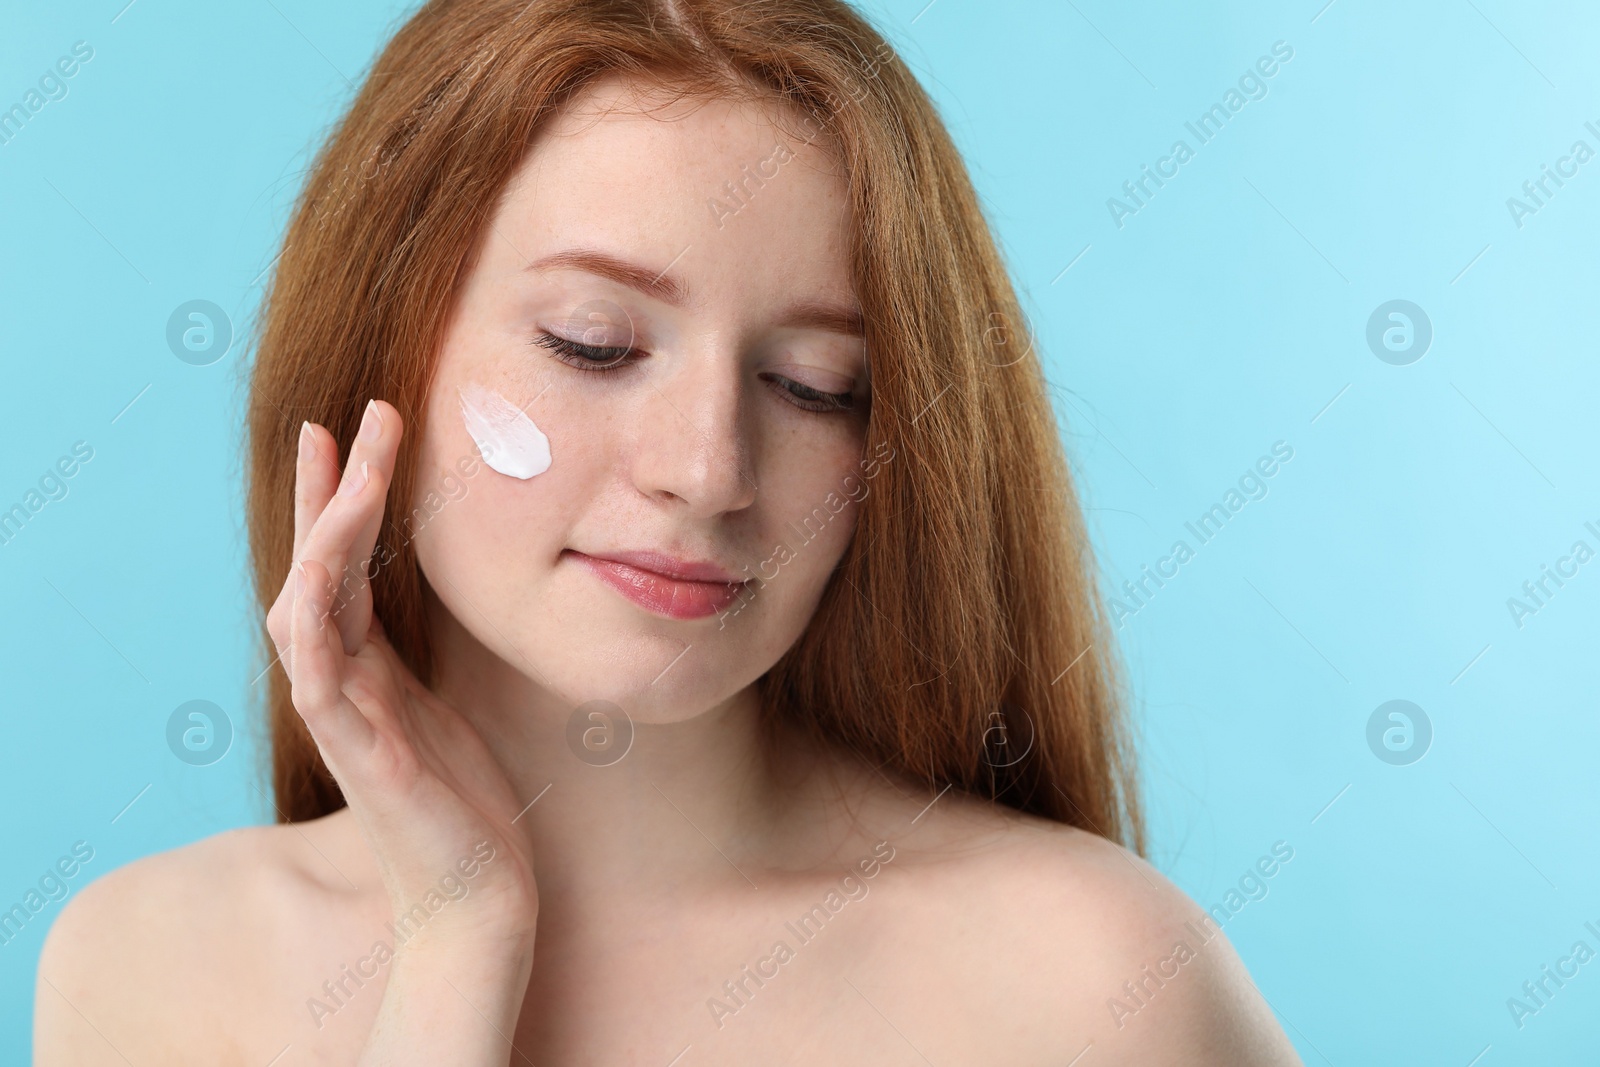 Photo of Beautiful woman with freckles and cream on her face against light blue background